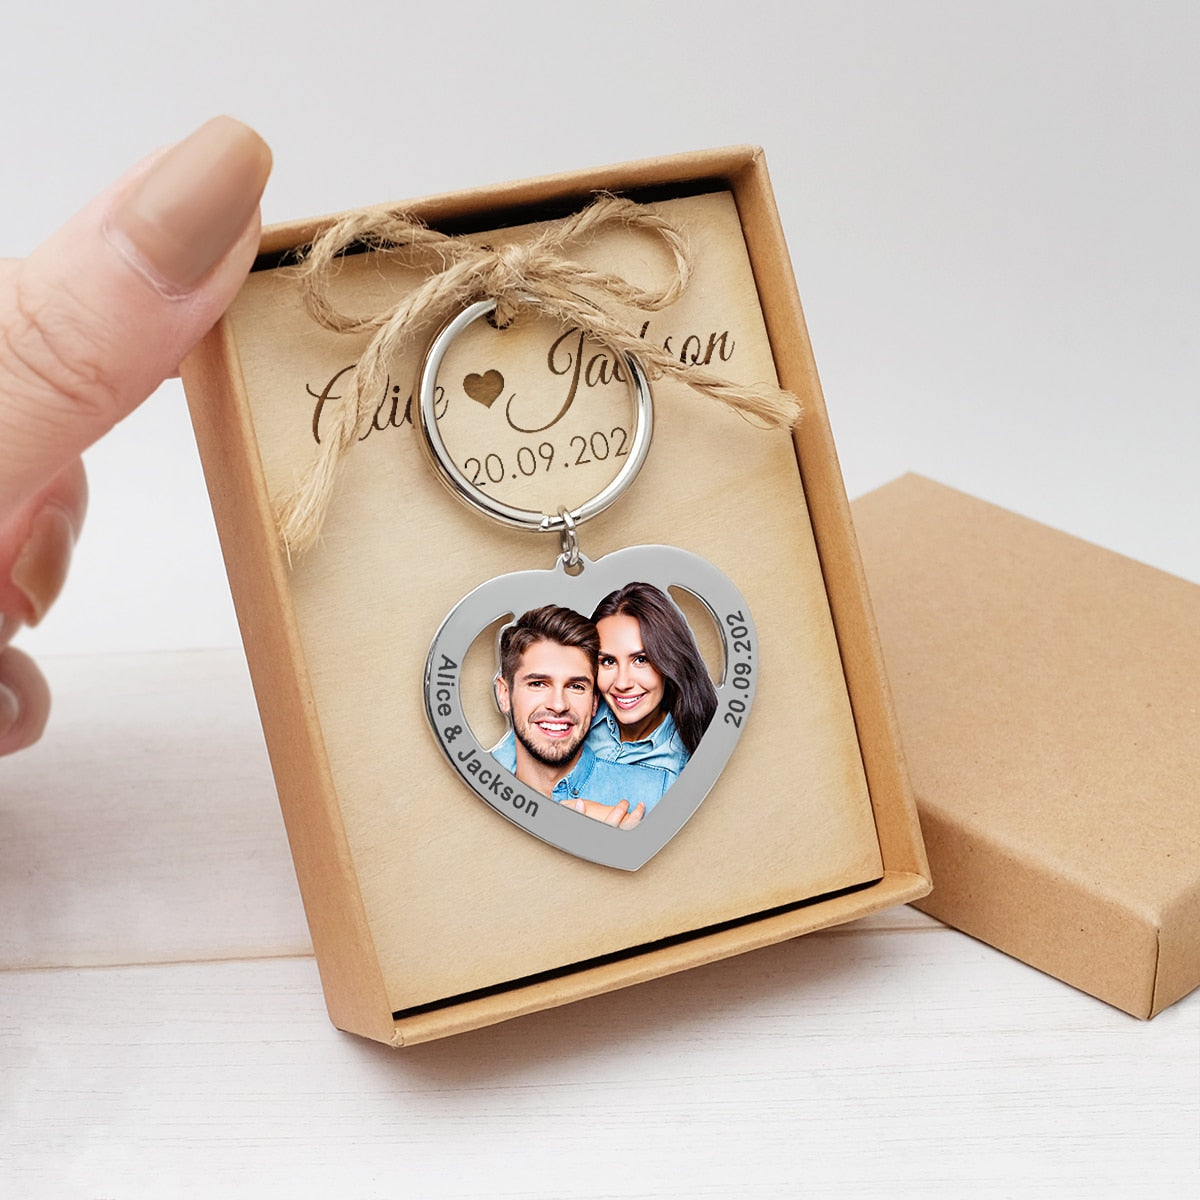 Personalized Photo & Text Engraved Heart Keychain